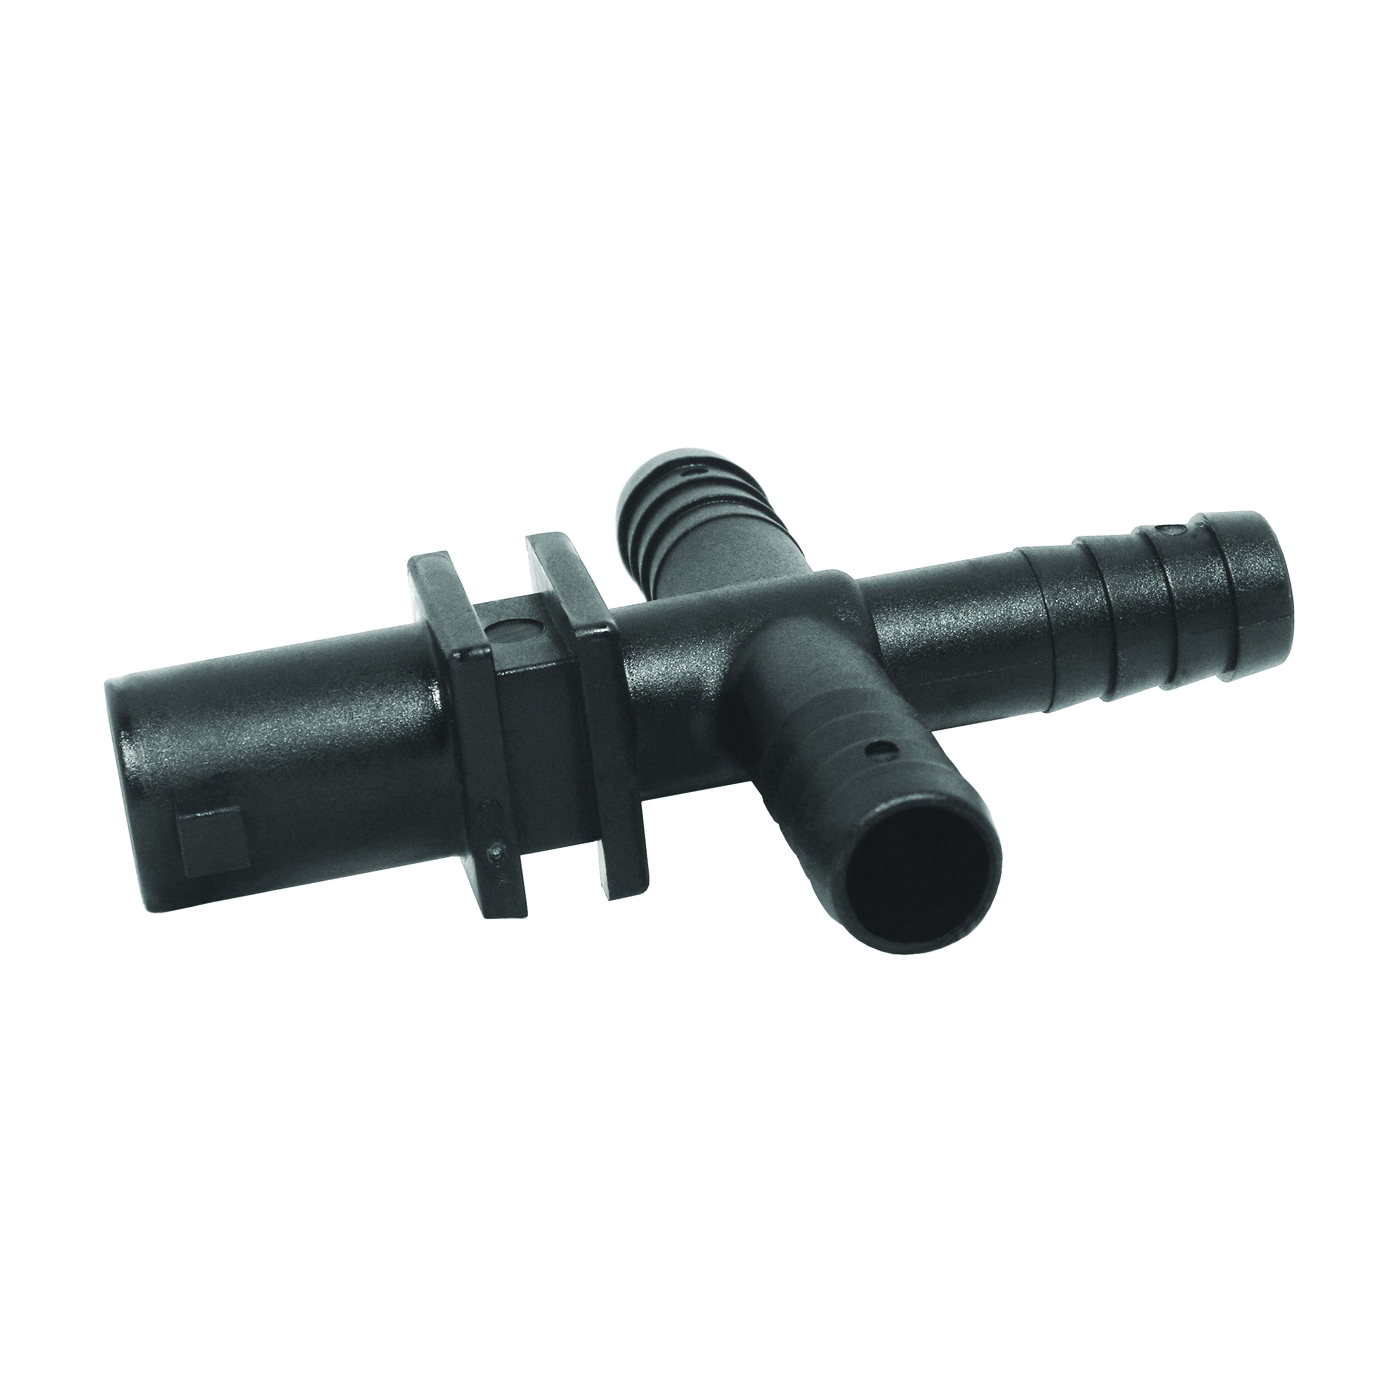 Y8231015 Dry Boom Nozzle Body Cross, 1/2 in, Quick x Hose Barb, 7 psi Pressure, EPDM Rubber